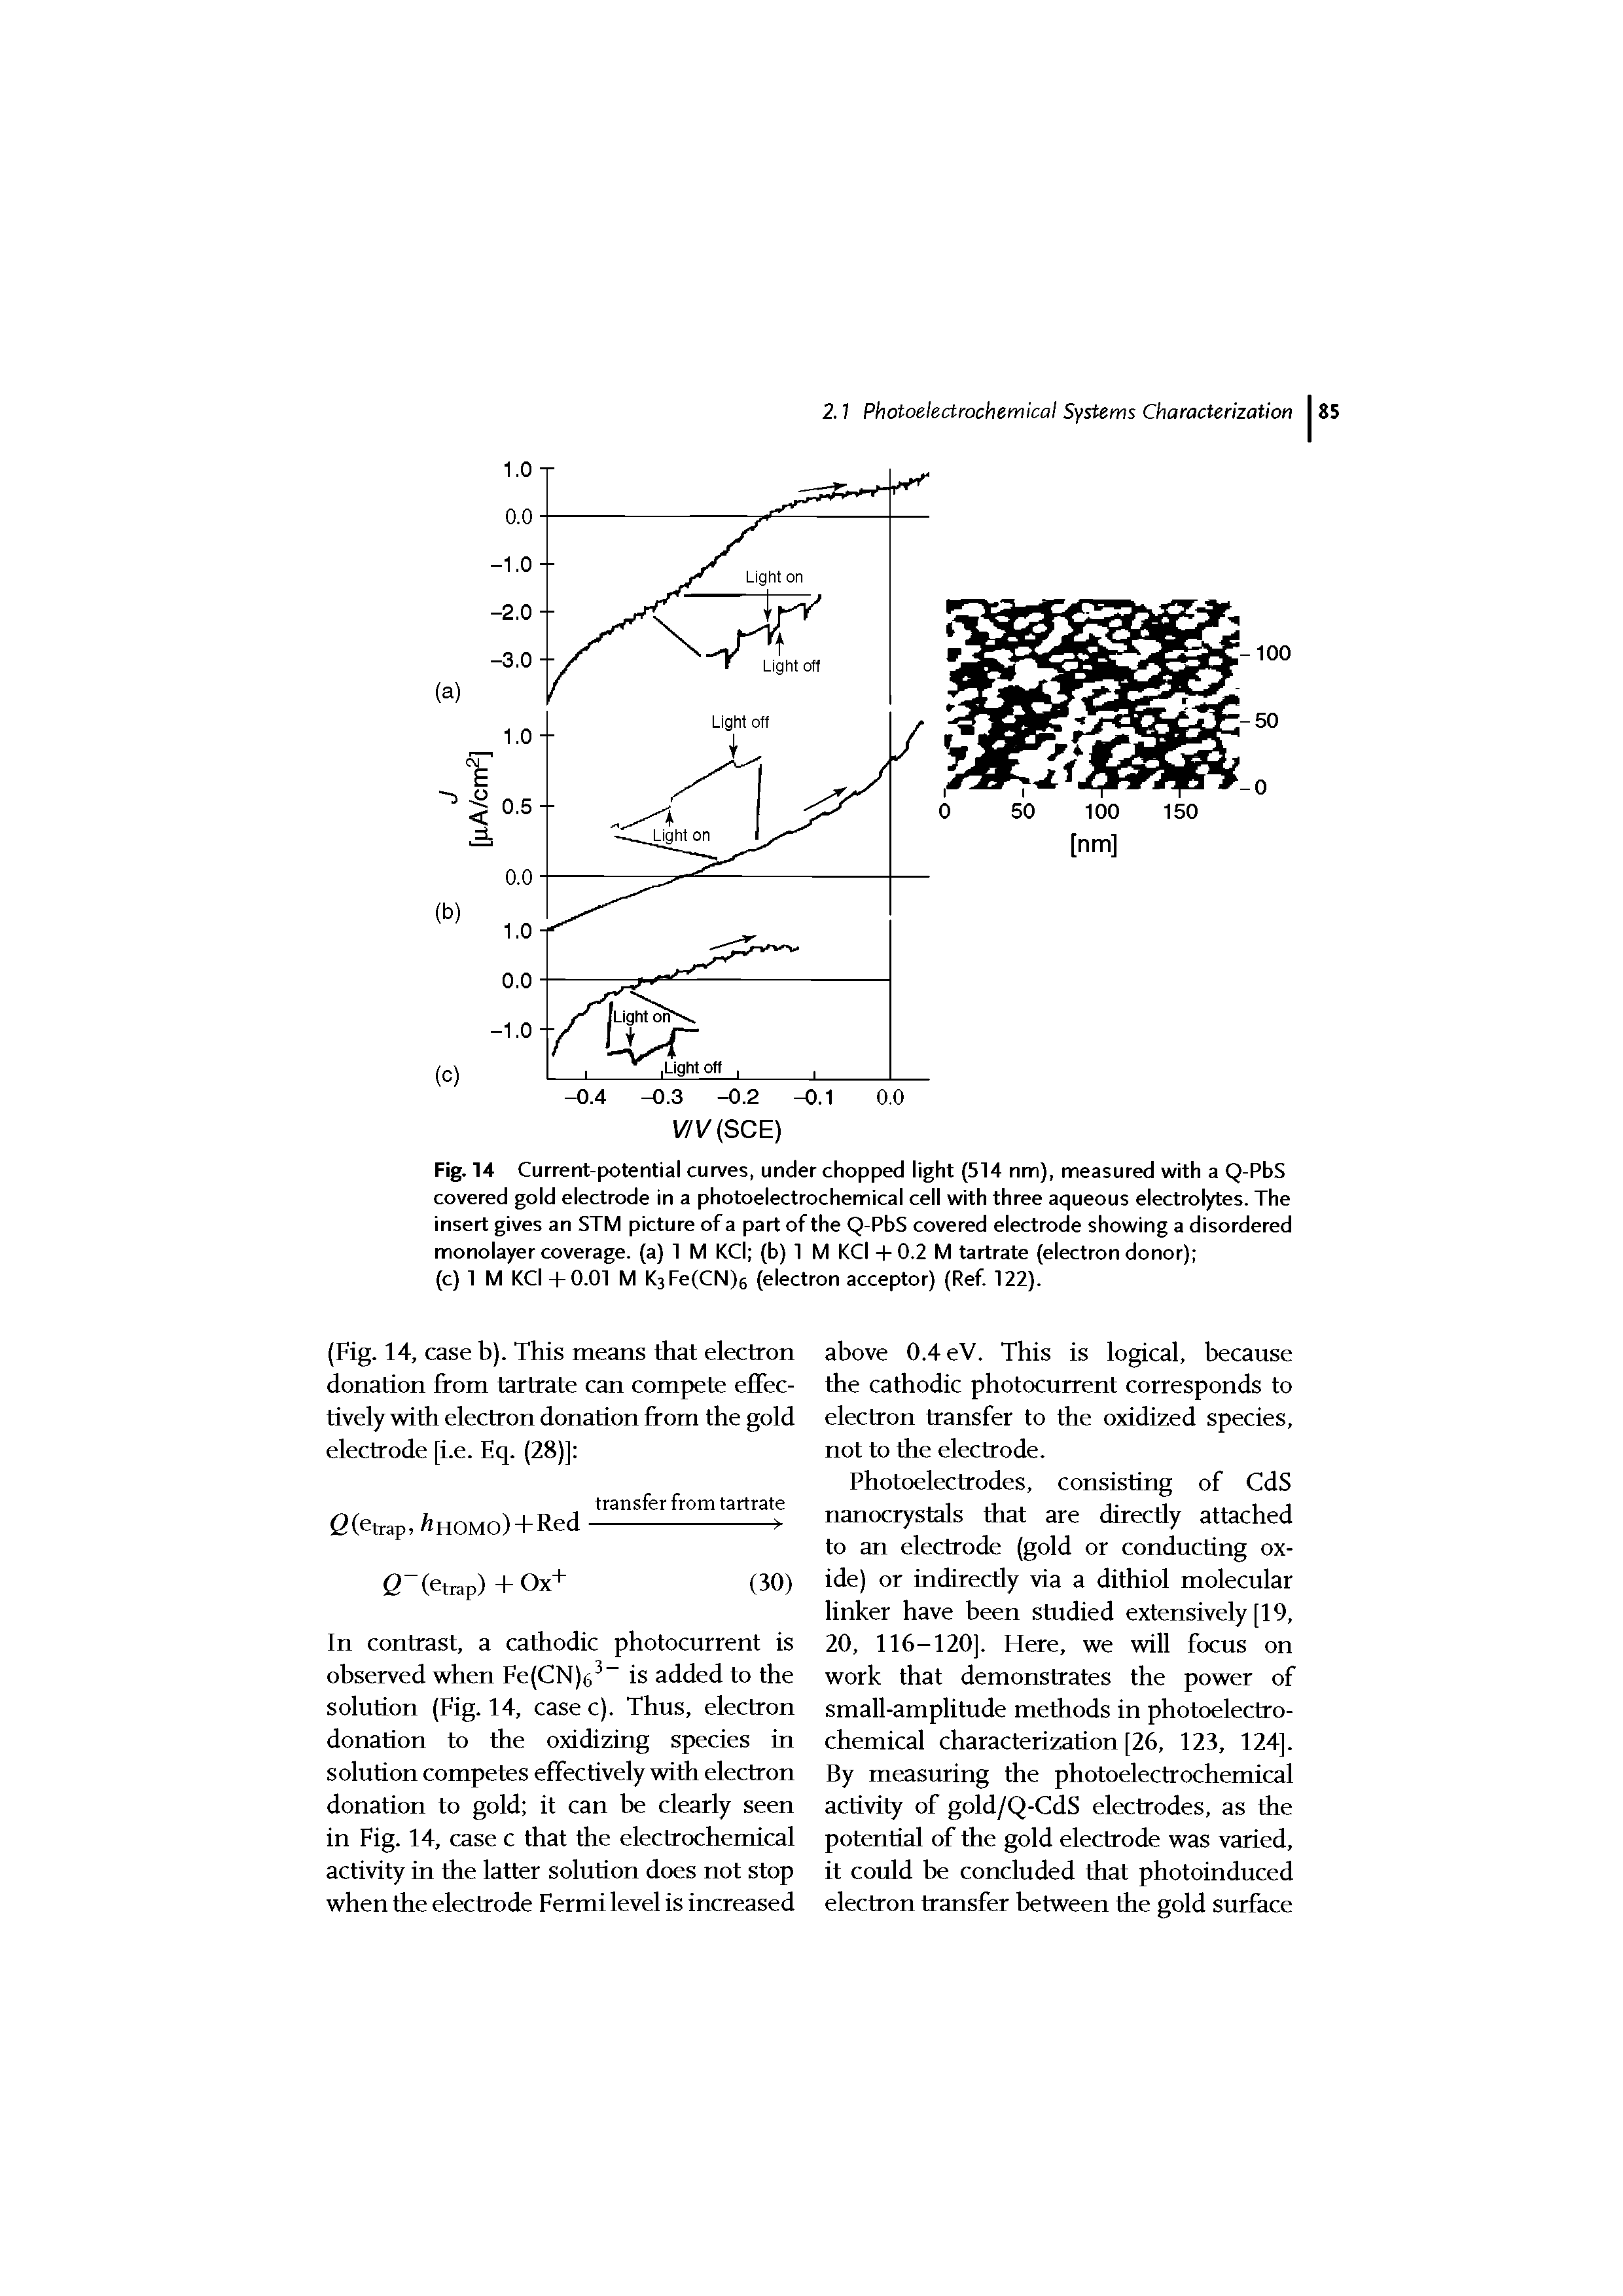 Fig. 14 Current-potential curves, under chopped light (514 nm), measured with a Q-PbS covered gold electrode in a photoelectrochemical cell with three aqueous electrolytes. The insert gives an STM picture of a part of the Q-PbS covered electrode showing a disordered monolayer coverage, (a) 1 M KCl (b) 1 M KCl -I- 0.2 M tartrate (electron donor) ...